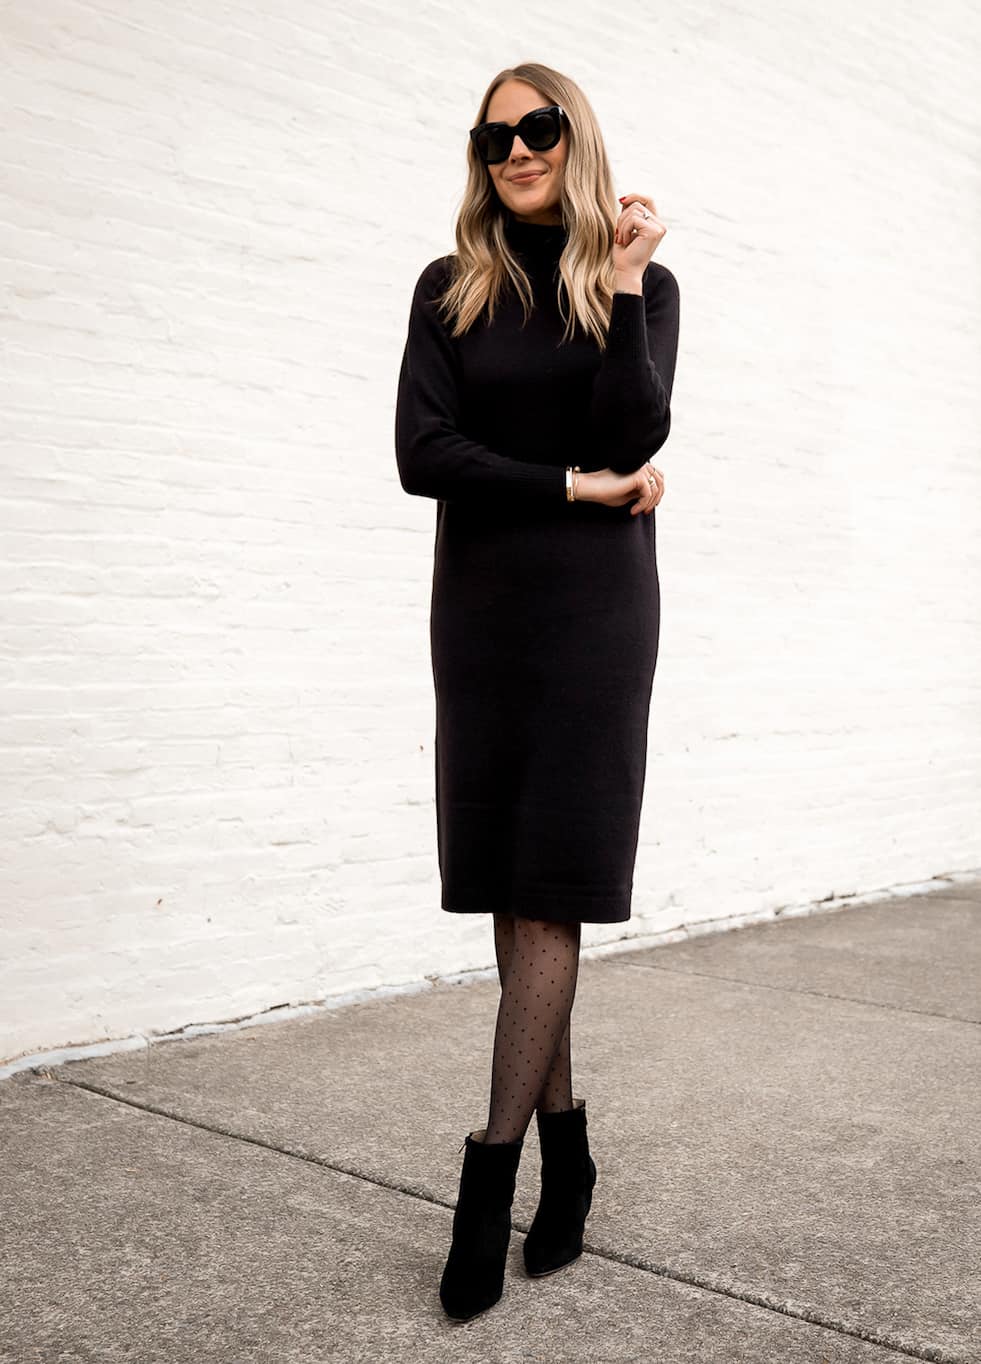 image of a woman wearing a midi length black sweater dress with black sheer polka-dot tights and black ankle boots